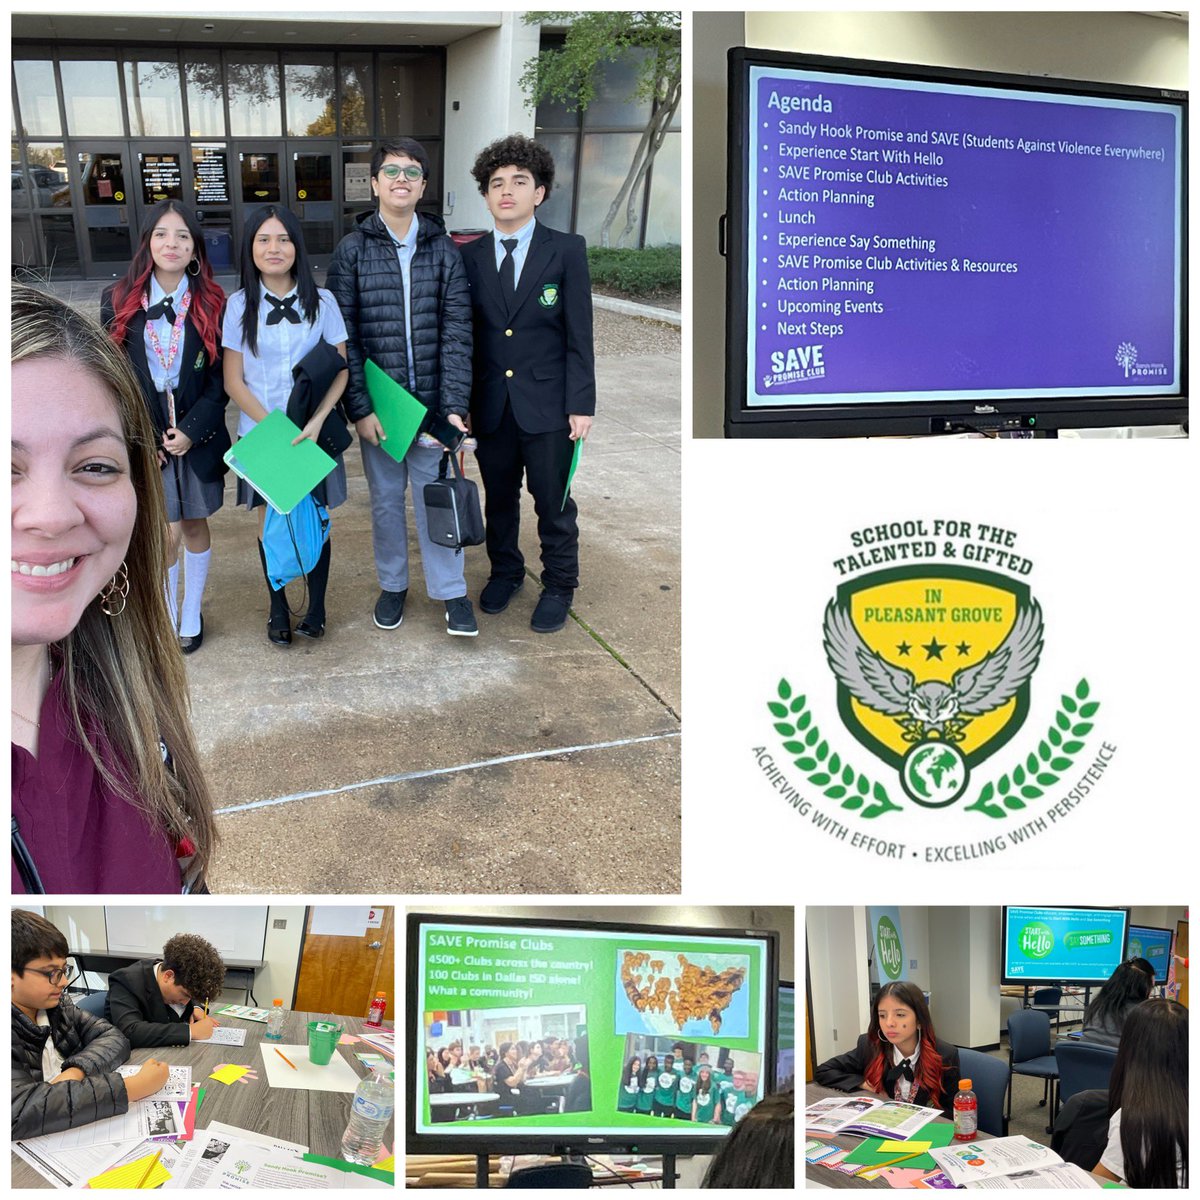 At the #SAVEPromiseClub Youth Leadership Training with 7th Grade Students @sandyhook 💛💚🦉 getting ideas to bring back to @STAGinPG to create a stronger sense of belonging in our school 💕 @DrReyC @Dr_Delgado1 @CounselingDISD @dallasschools @TeamDallasISD @MJJackson1906